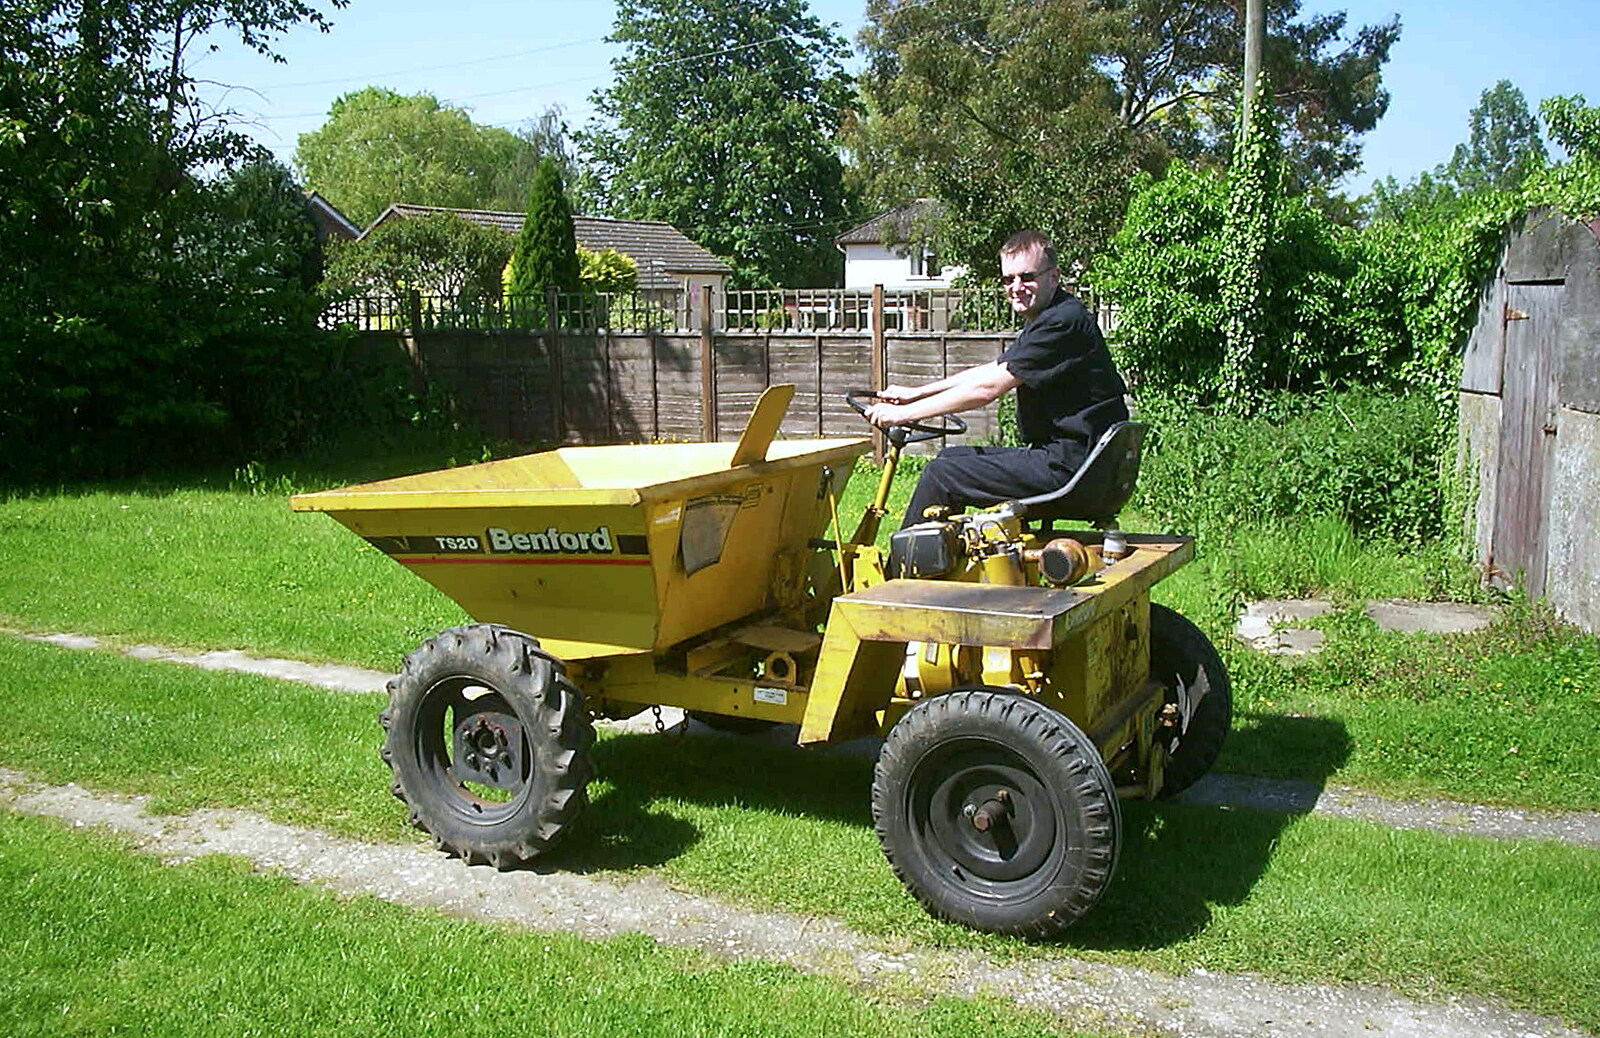 The BSCC at the Victoria, Earl Soham, Suffolk - 27th May 2002: Nosher has a go of the mini dumper truck